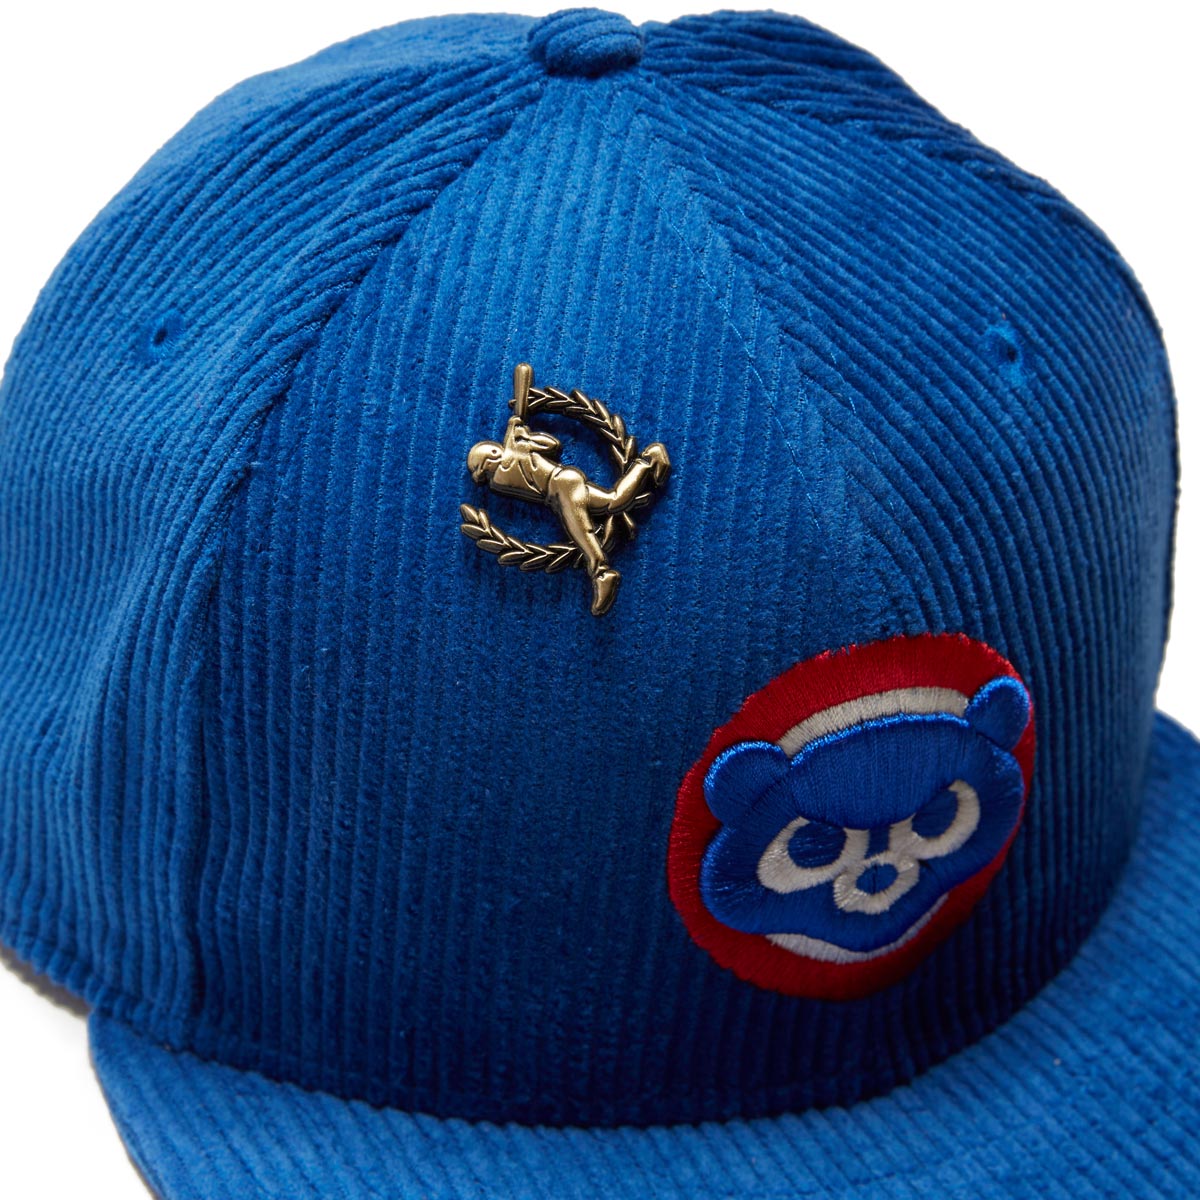 New Era 5950 Letterman Pin Hat - Chicago Cubs image 3